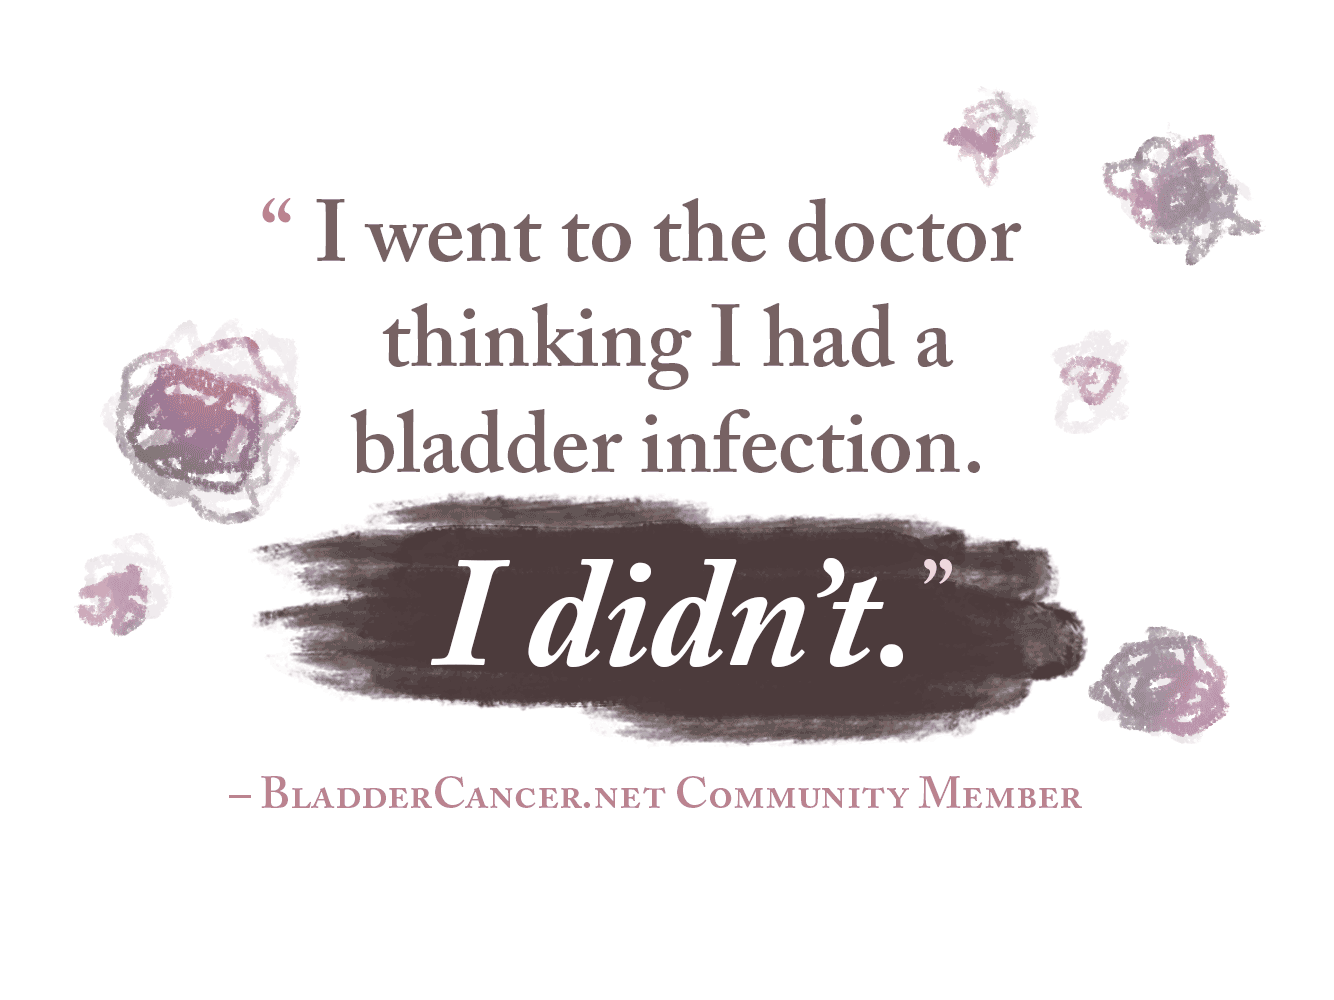 I went to the doctor thinking I had a bladder infection. I didn’t. A quote from a BladderCancer.net Community Member